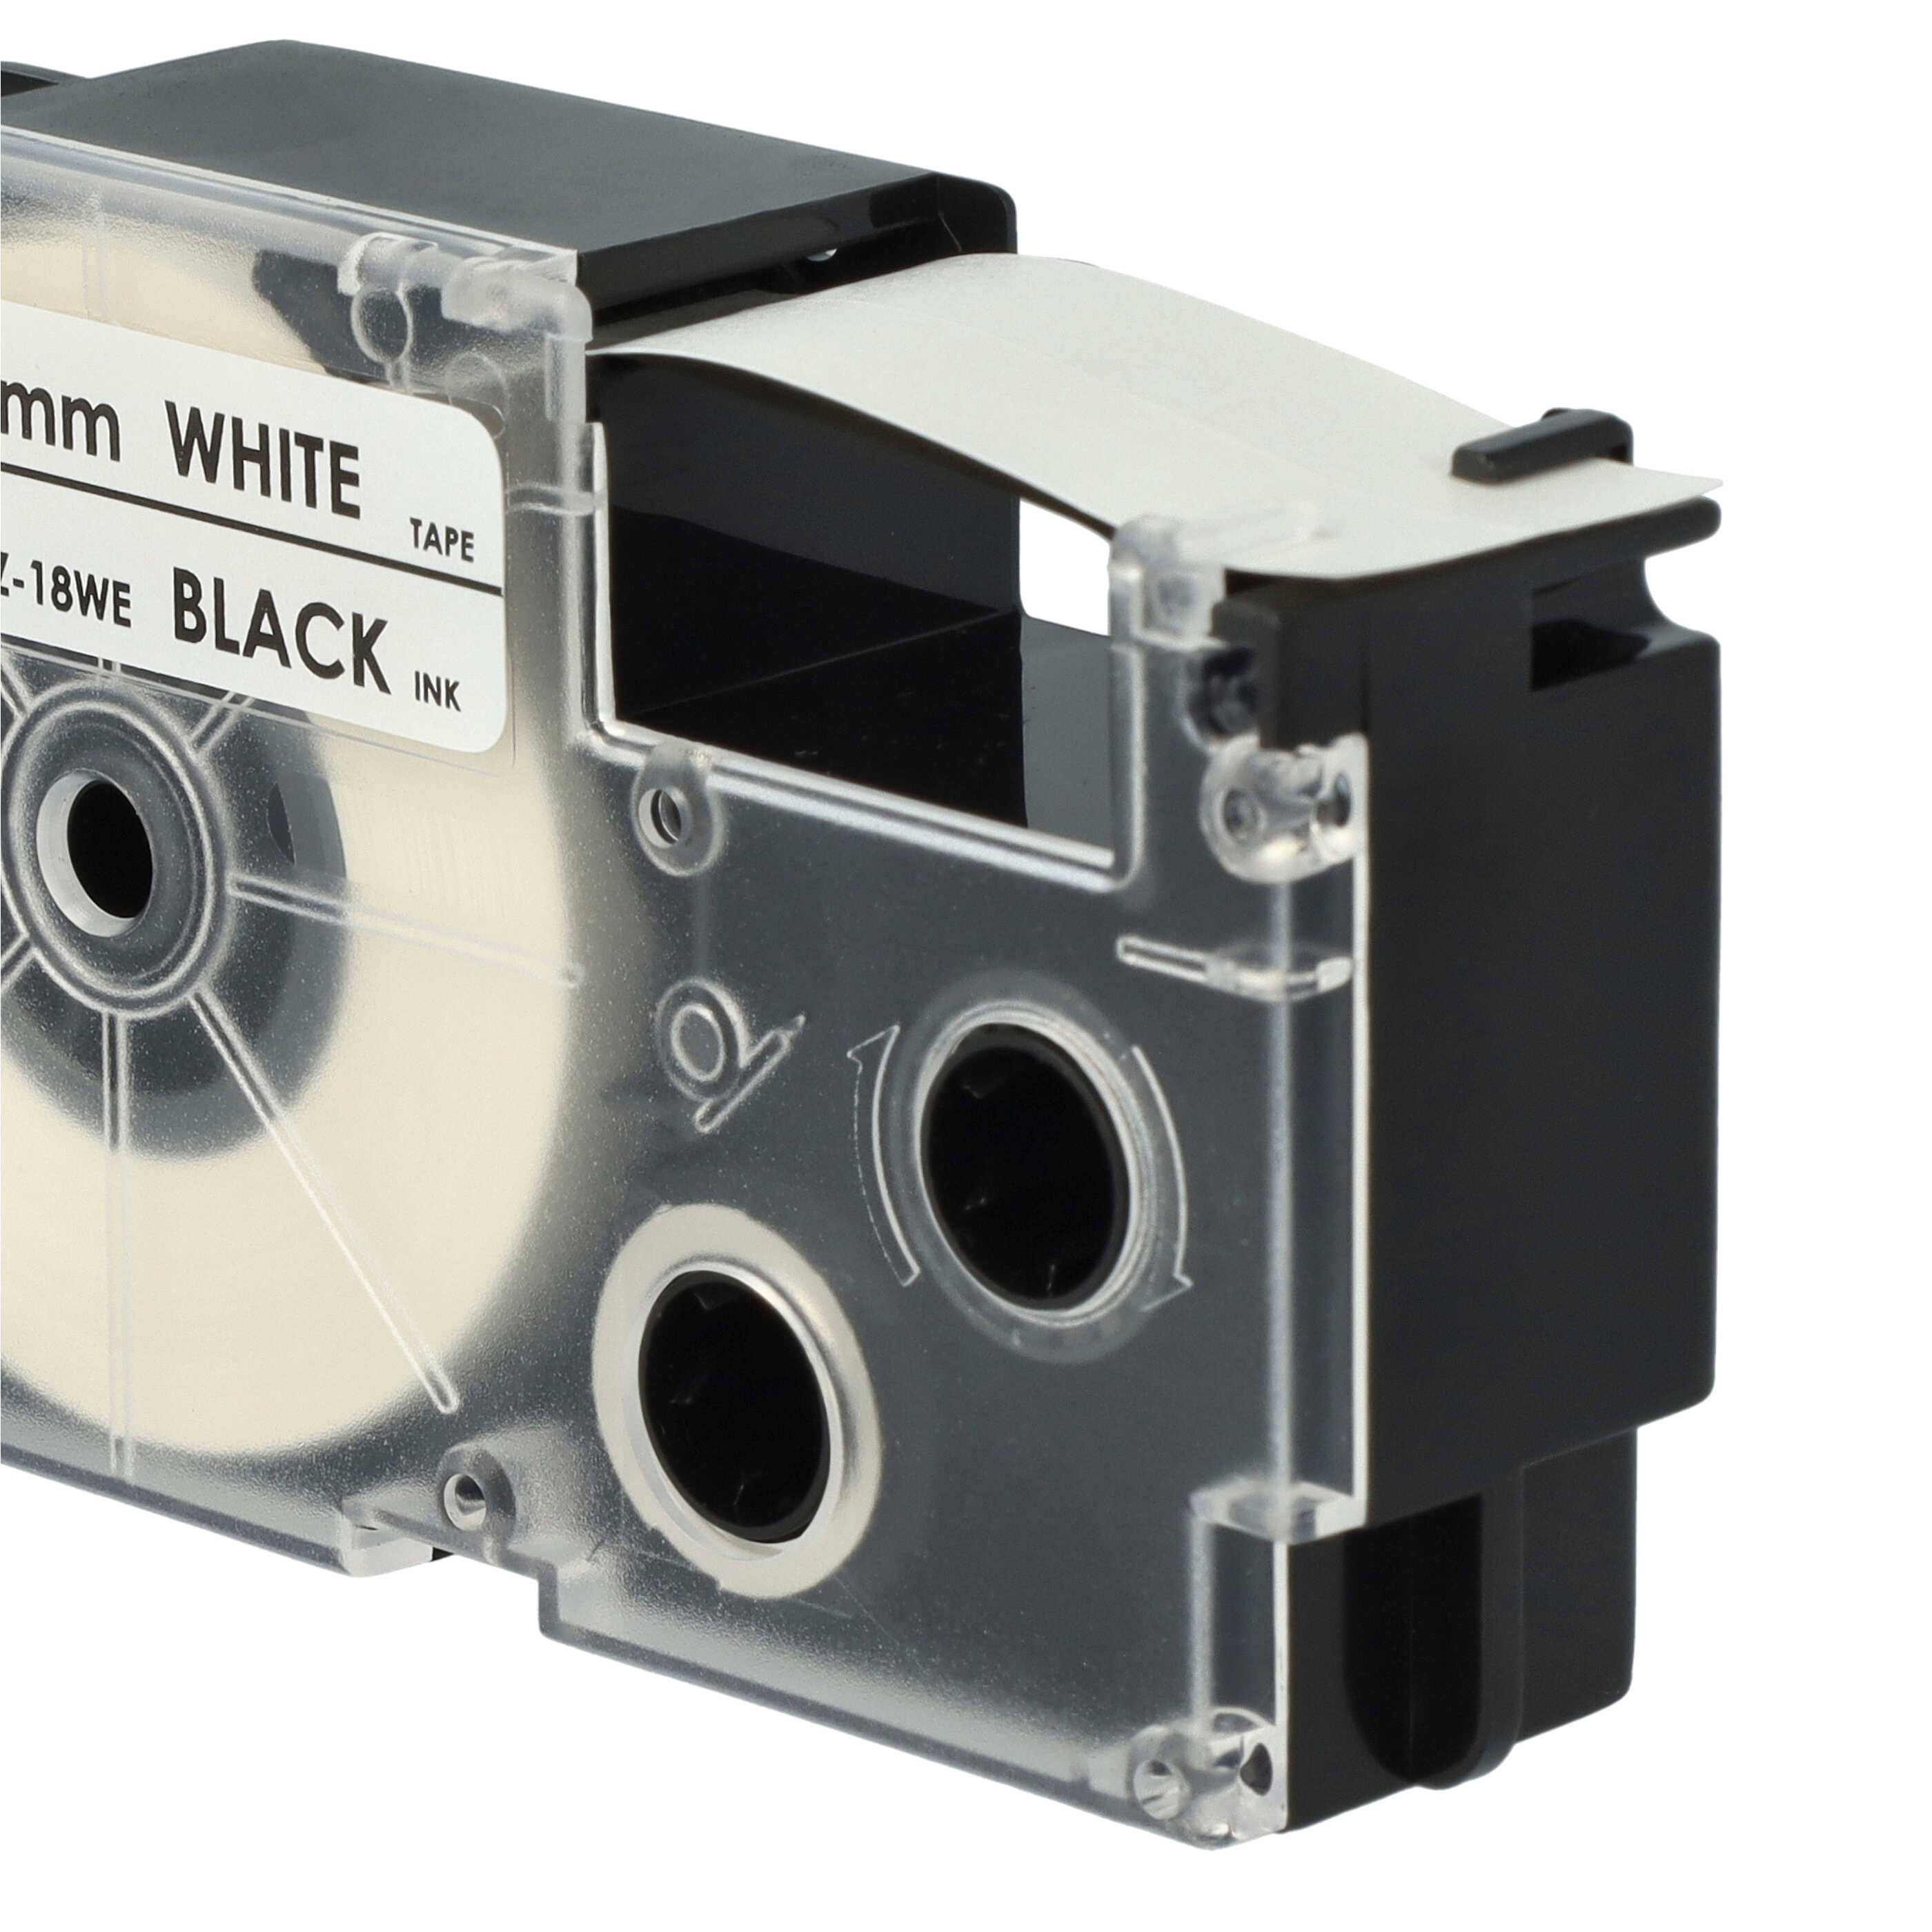 Label Tape as Replacement for Casio XR-18WE, XR-18WE1 - 18 mm Black to White, pet+ RESIN